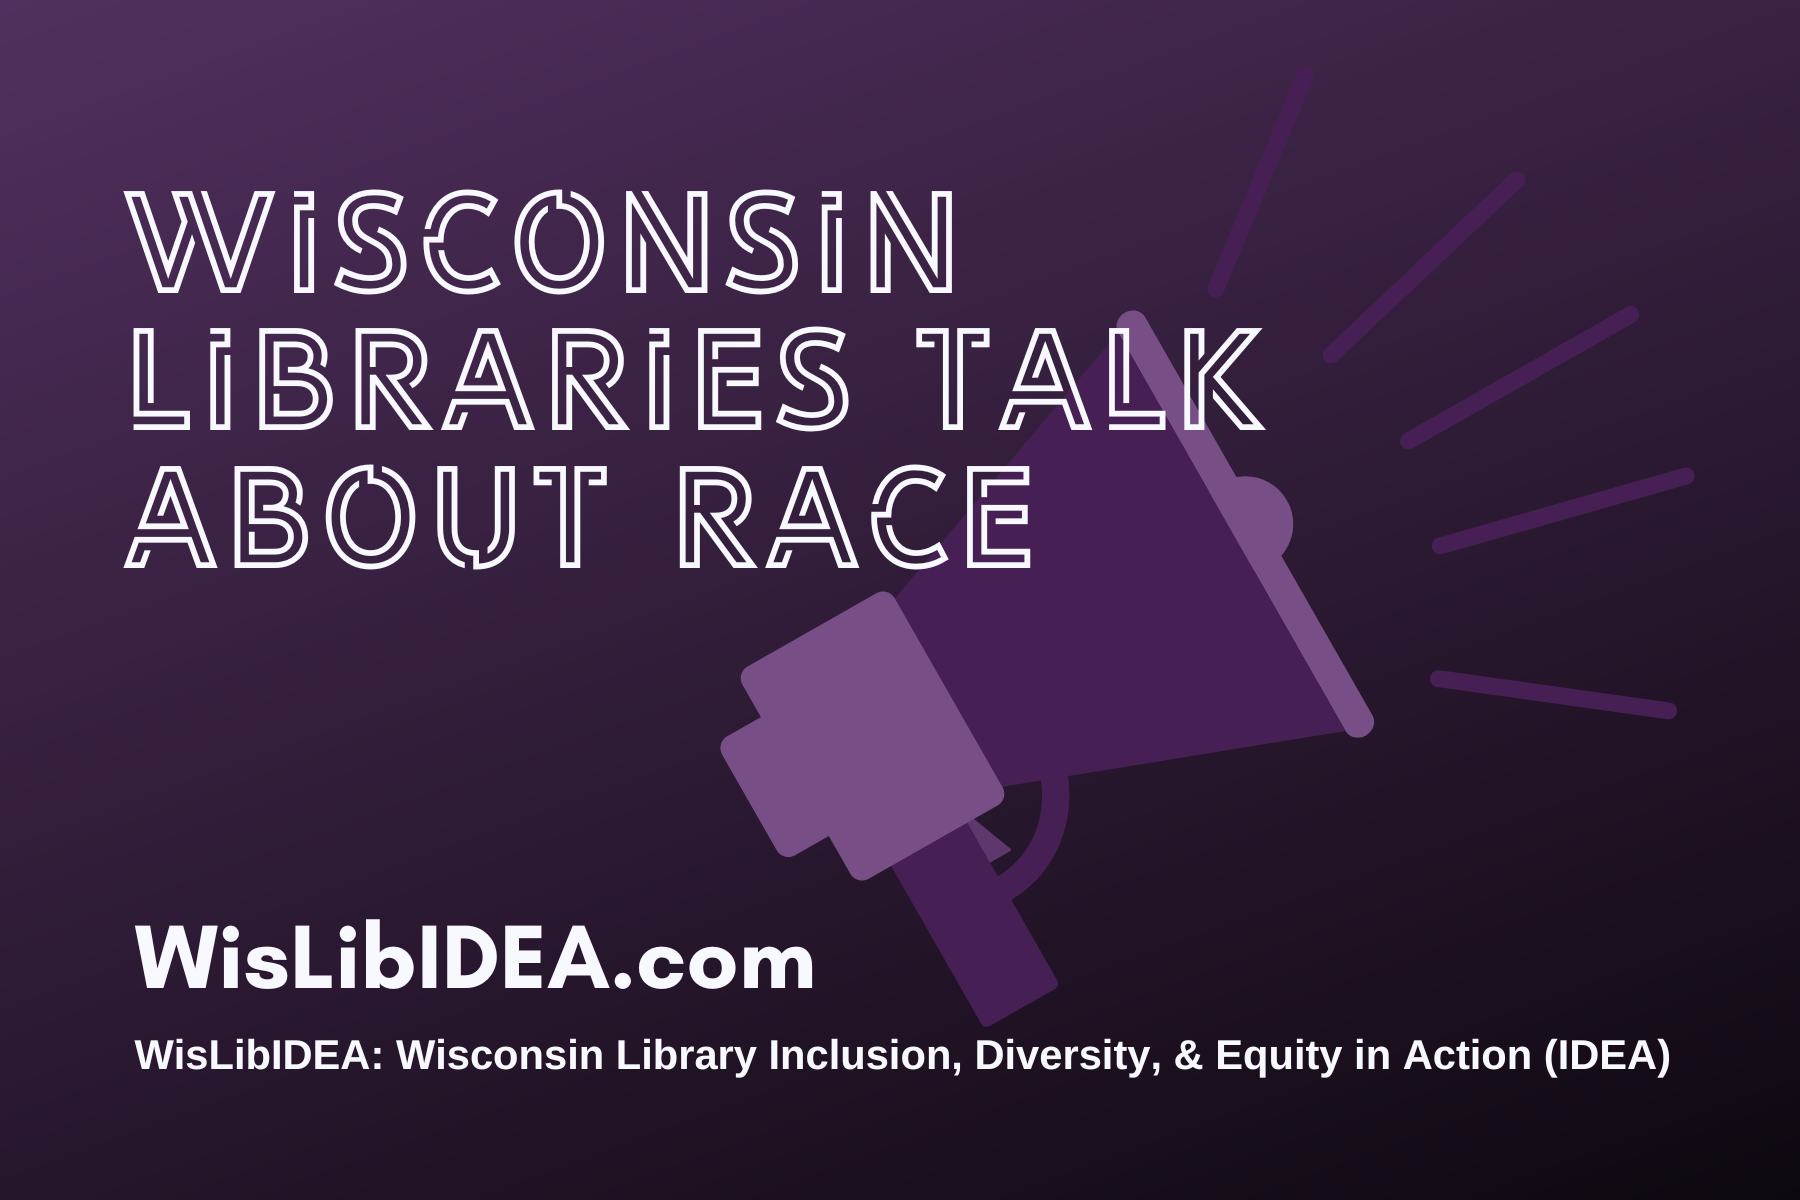 Wisconsin Libraries Talk About Race